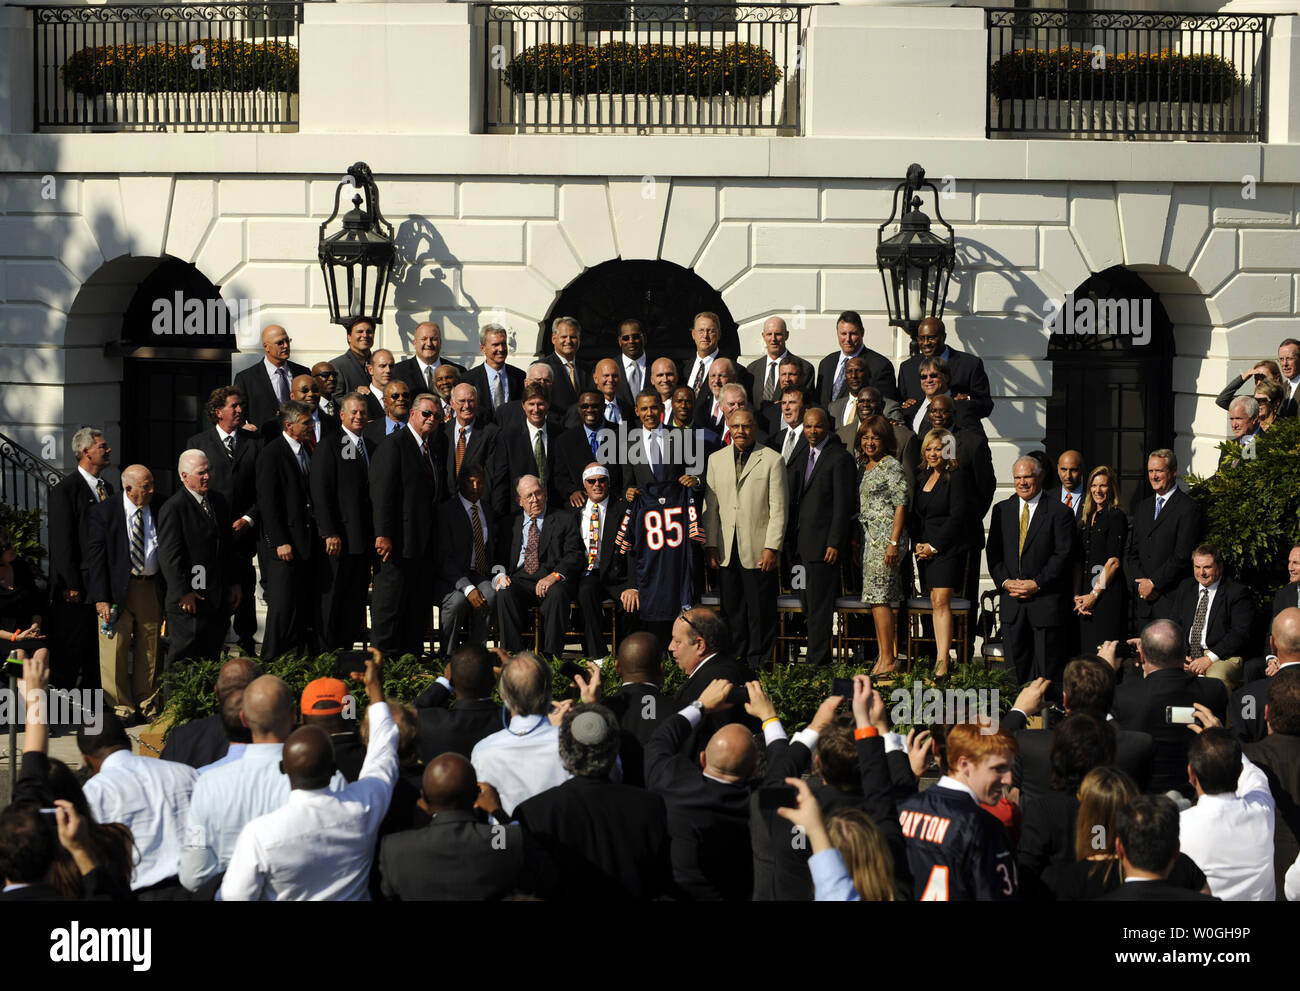 U.S. President Barack Obama welcomes the 1985 Super Bowl Champion Chicago Bears to celebrate the 25th anniversary of their Super Bowl victory on the South Lawn of the White House in Washington, DC, on October 7, 2011. The Bears' visit to the White House was cancelled in 1985 after the Space Shuttle Challenger disaster.      UPI/Roger L. Wollenberg Stock Photo